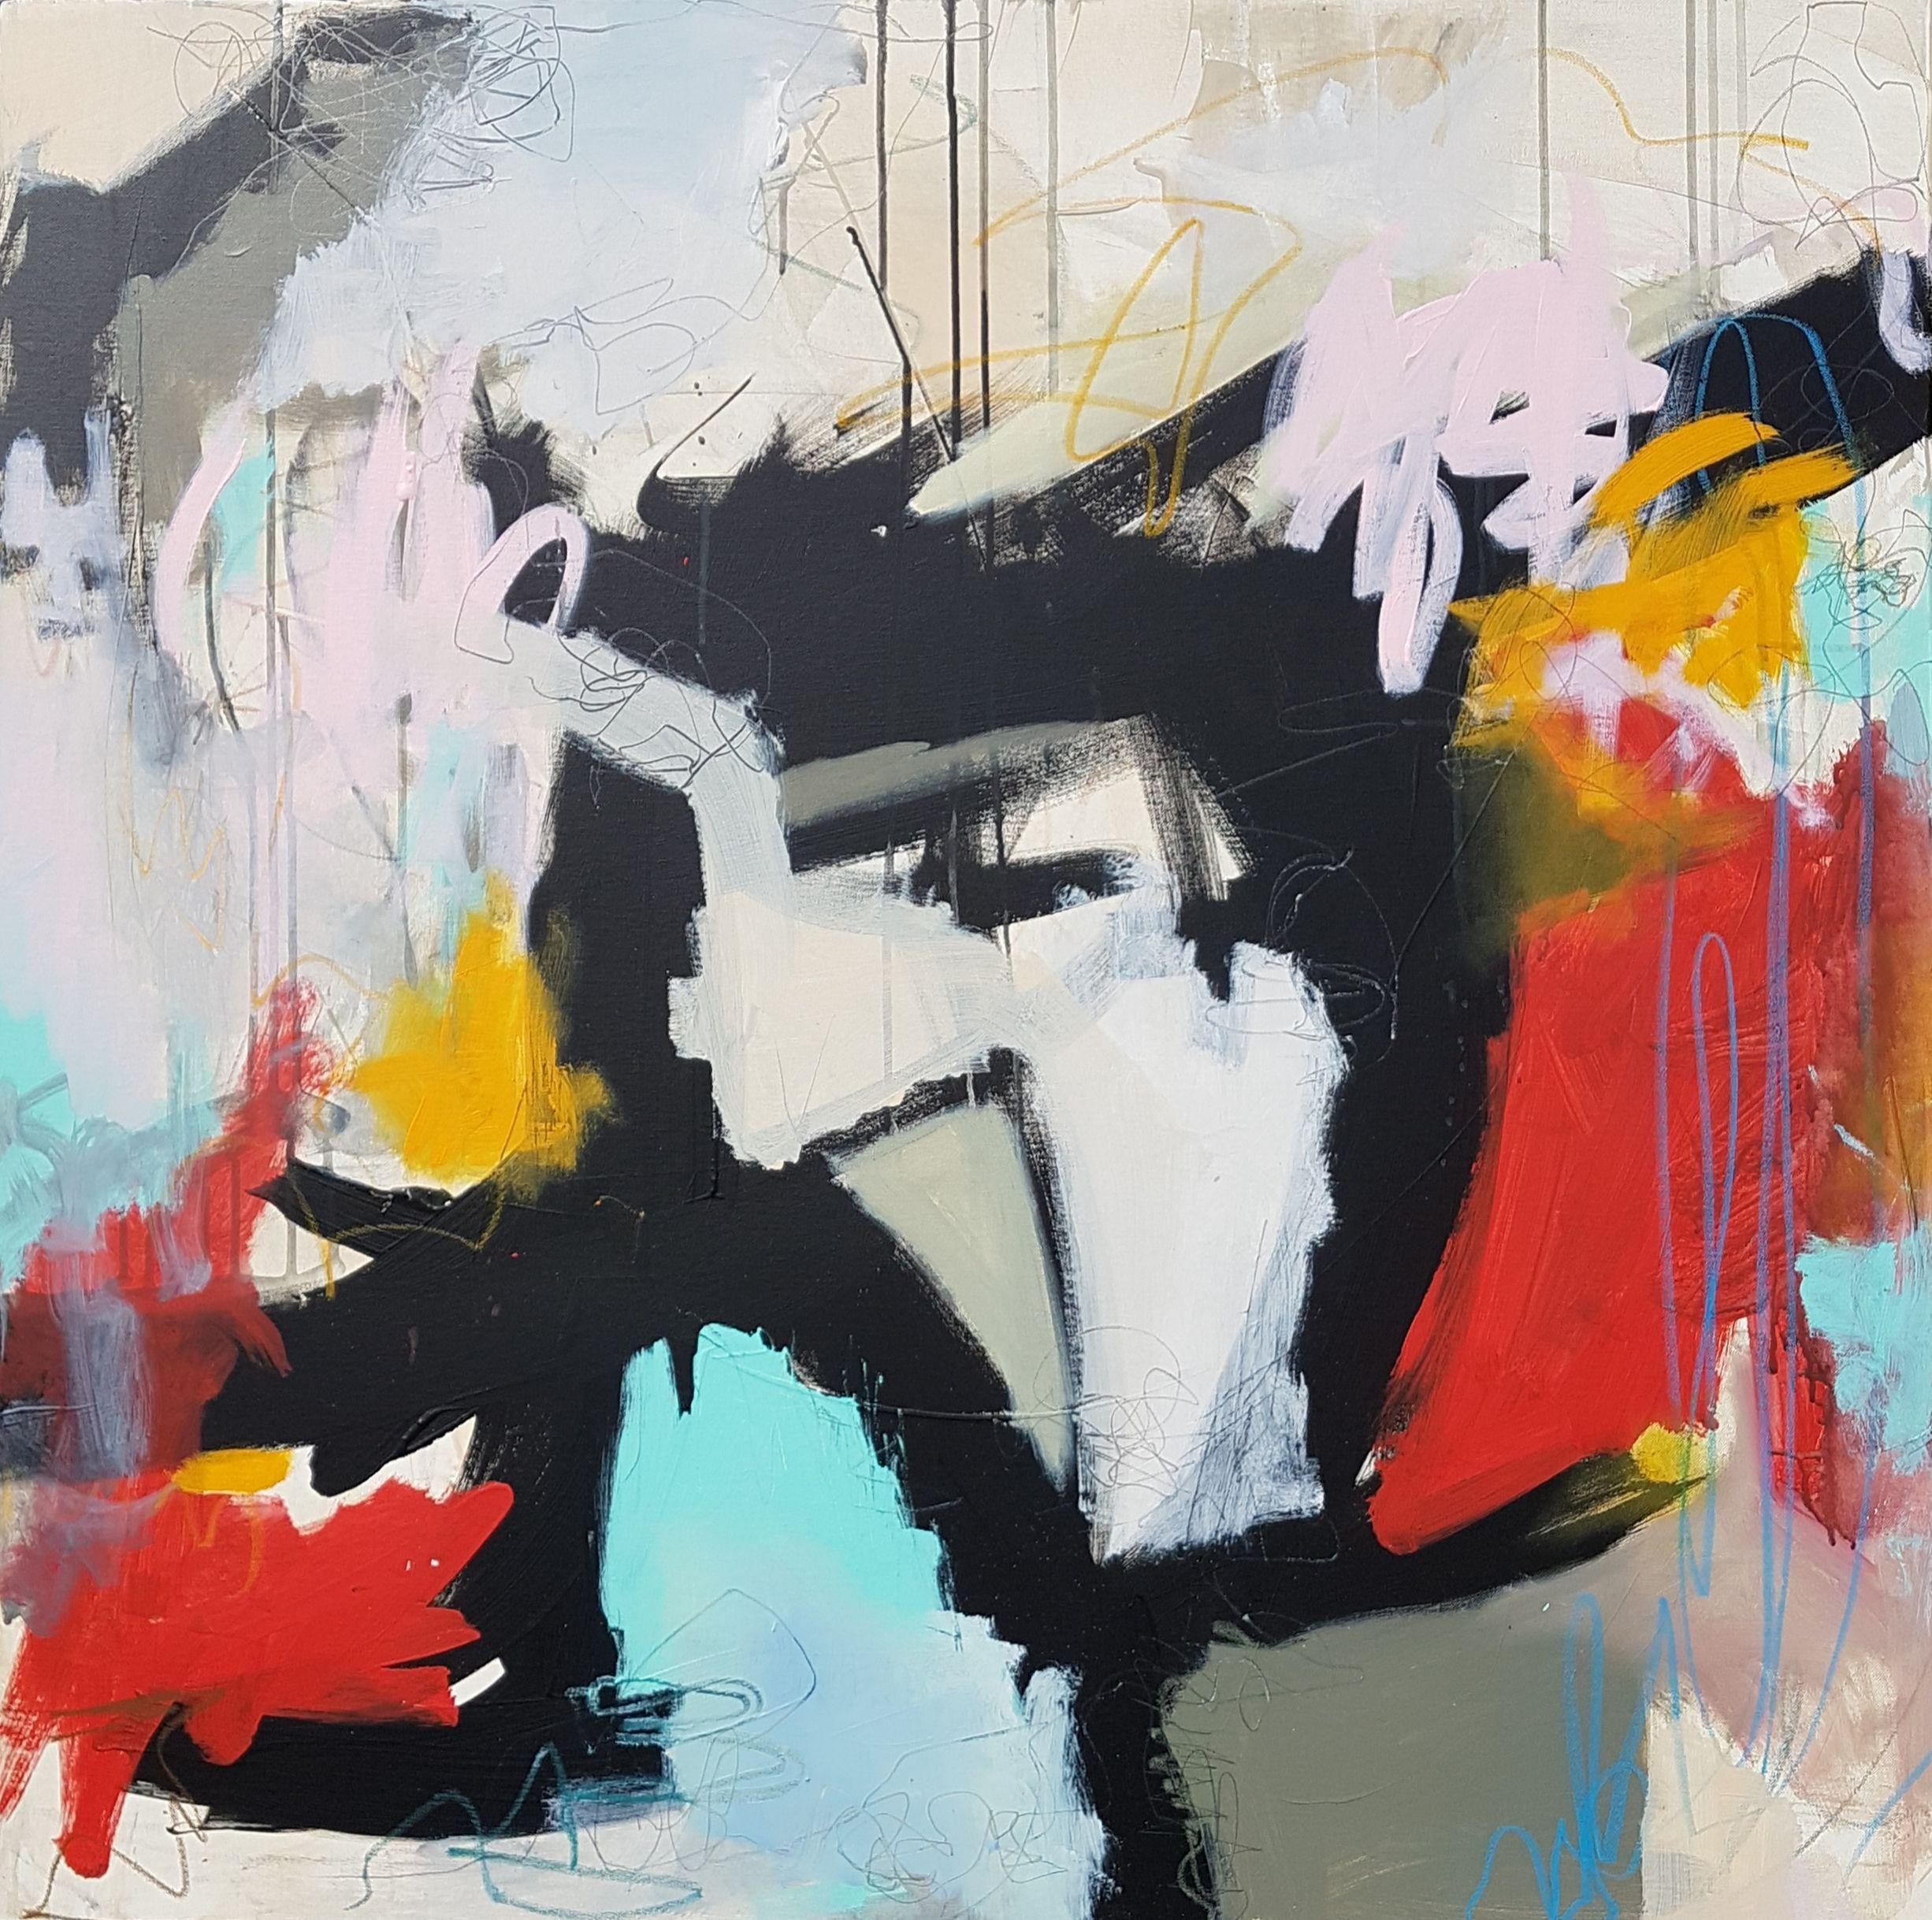 Composition II is part of a serie inspired by the big names of abstract expressionism such as Franz Kline, Willem de Kooning, Joan Mitchell. The composition is made around a black structure, the work has been worked in the four directions and with